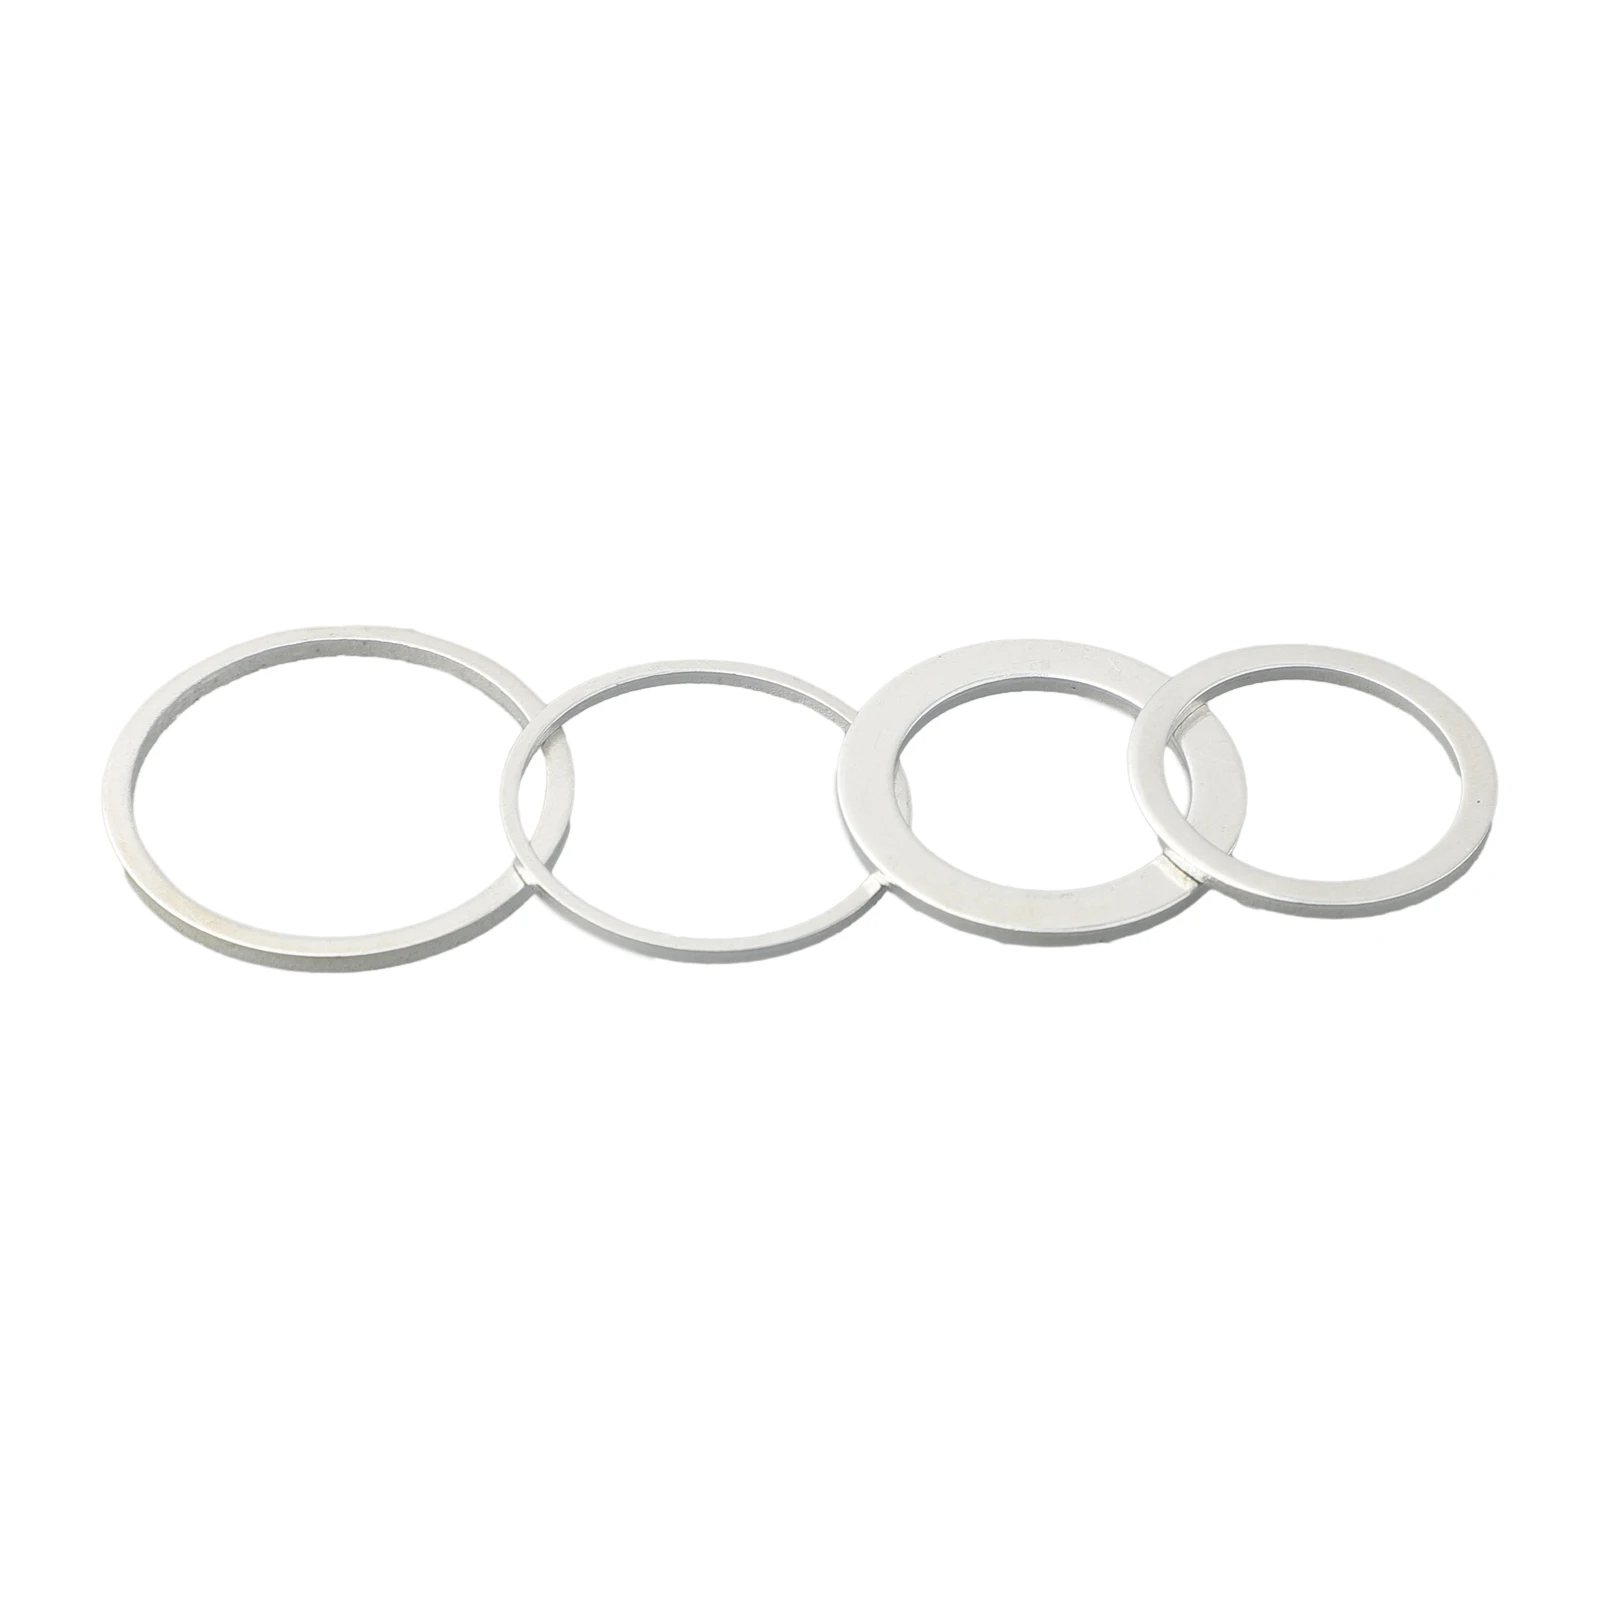 Circular Saw Ring Reduction Ring Replacement Silver 4 Sizes 4Pcs Conversion Ring Metal Useful Brand New Durable